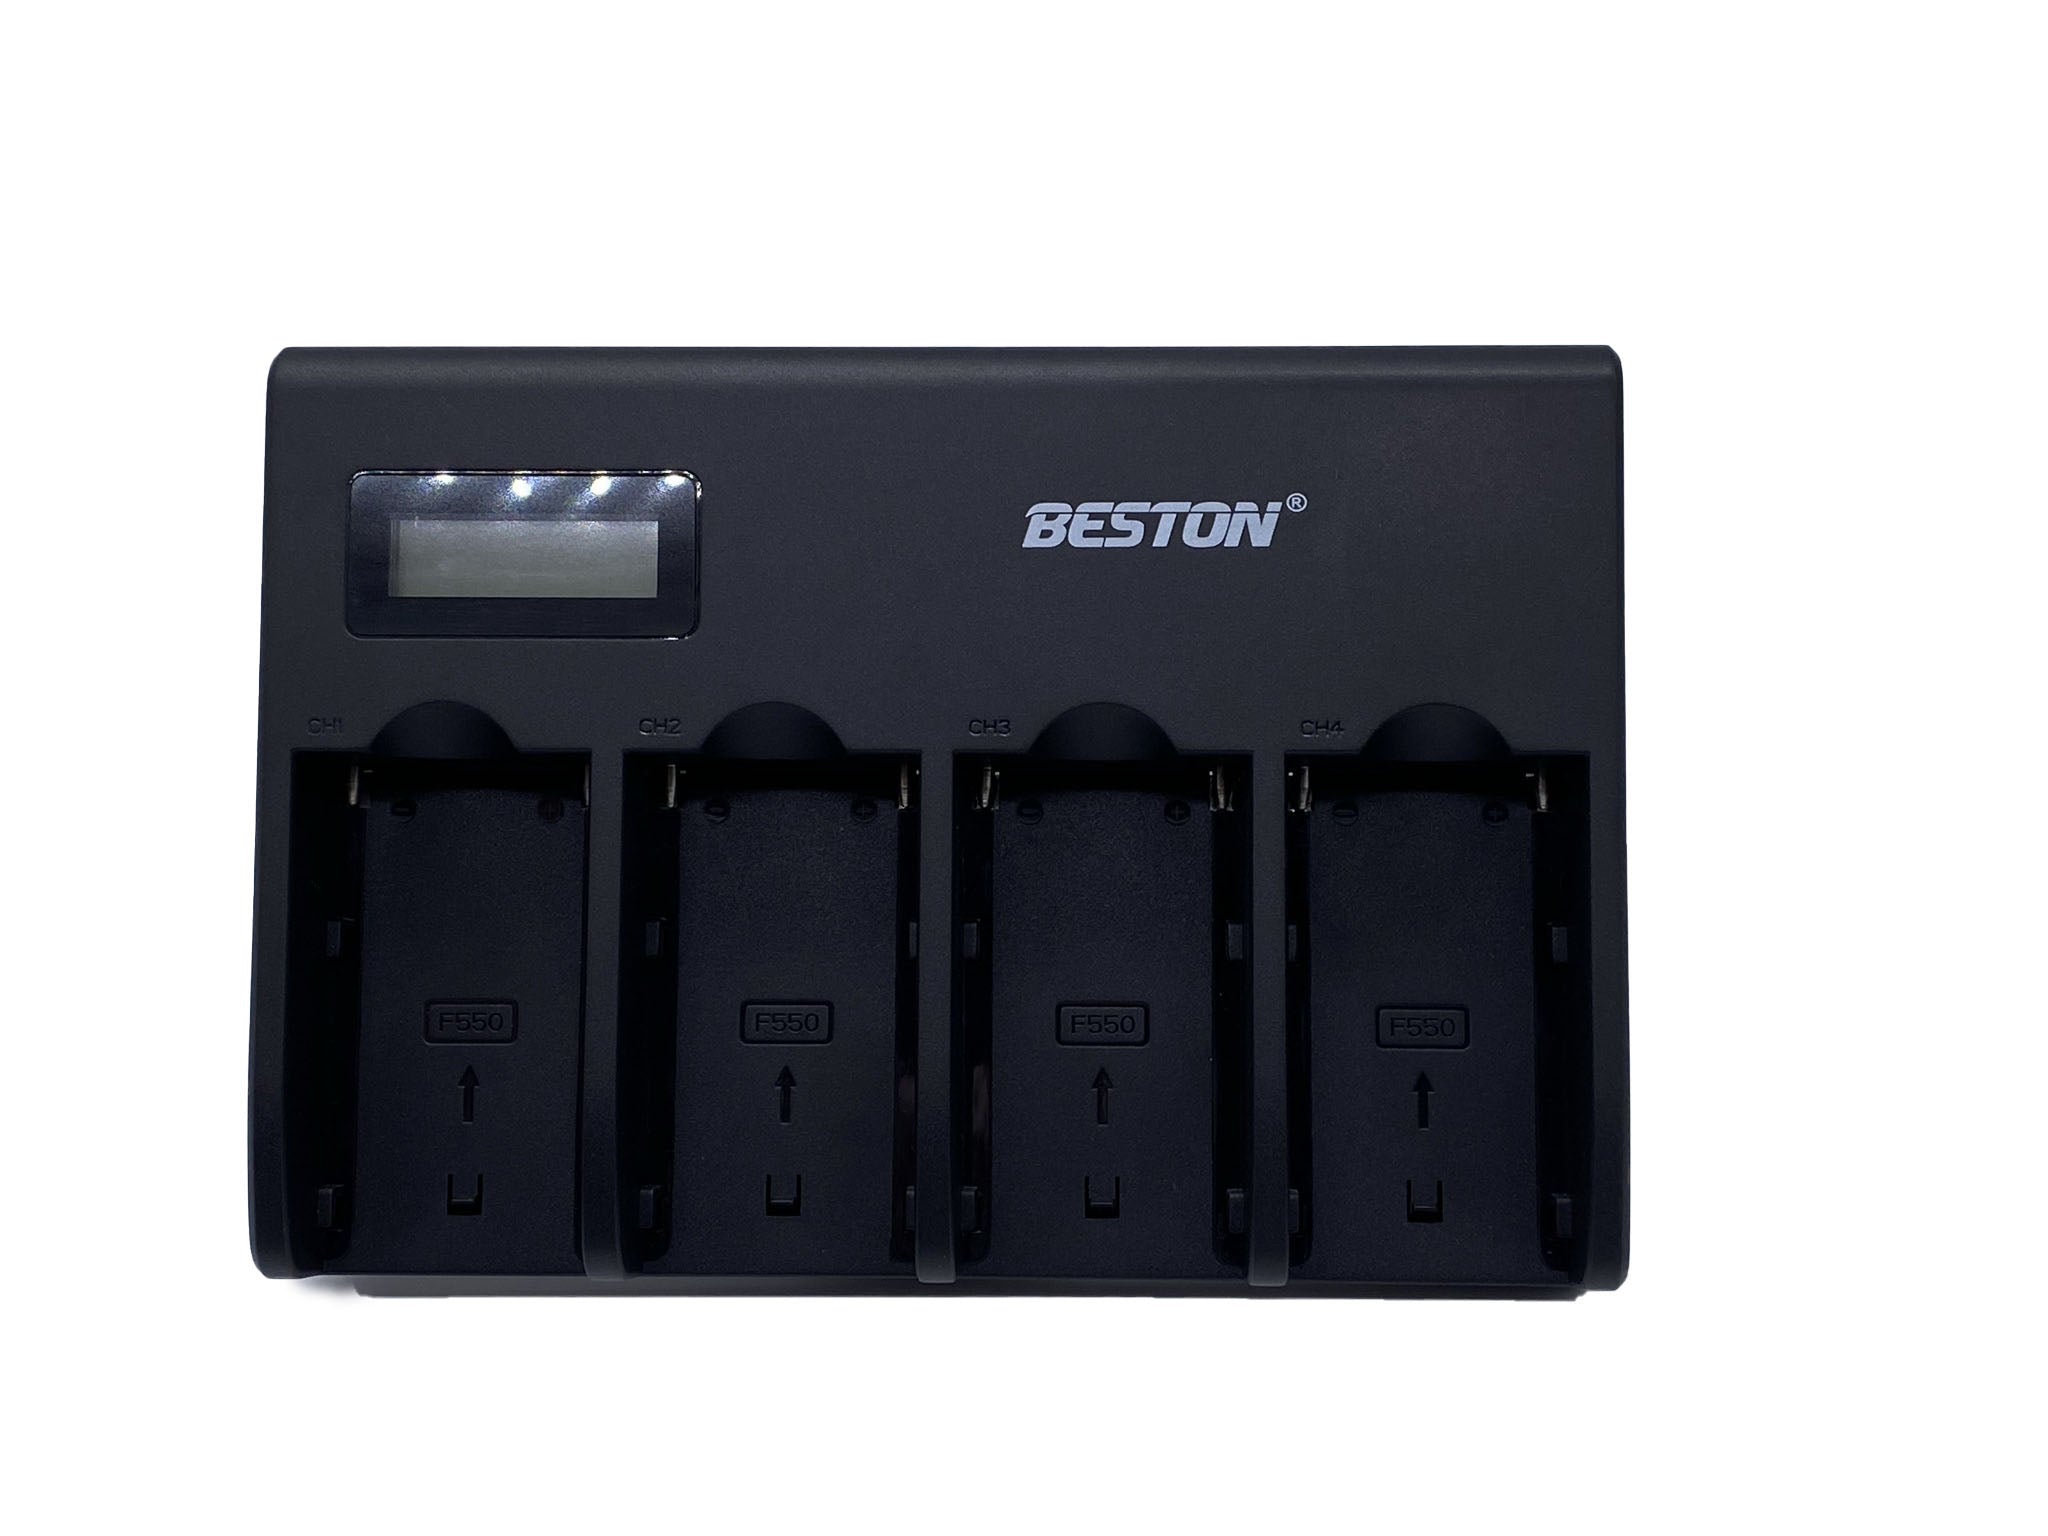 Beston SD403L AC input Smart Battery Charger for Sony NP-F550 F750 F960 Rechargeable Batteries Beston Battery Chargers